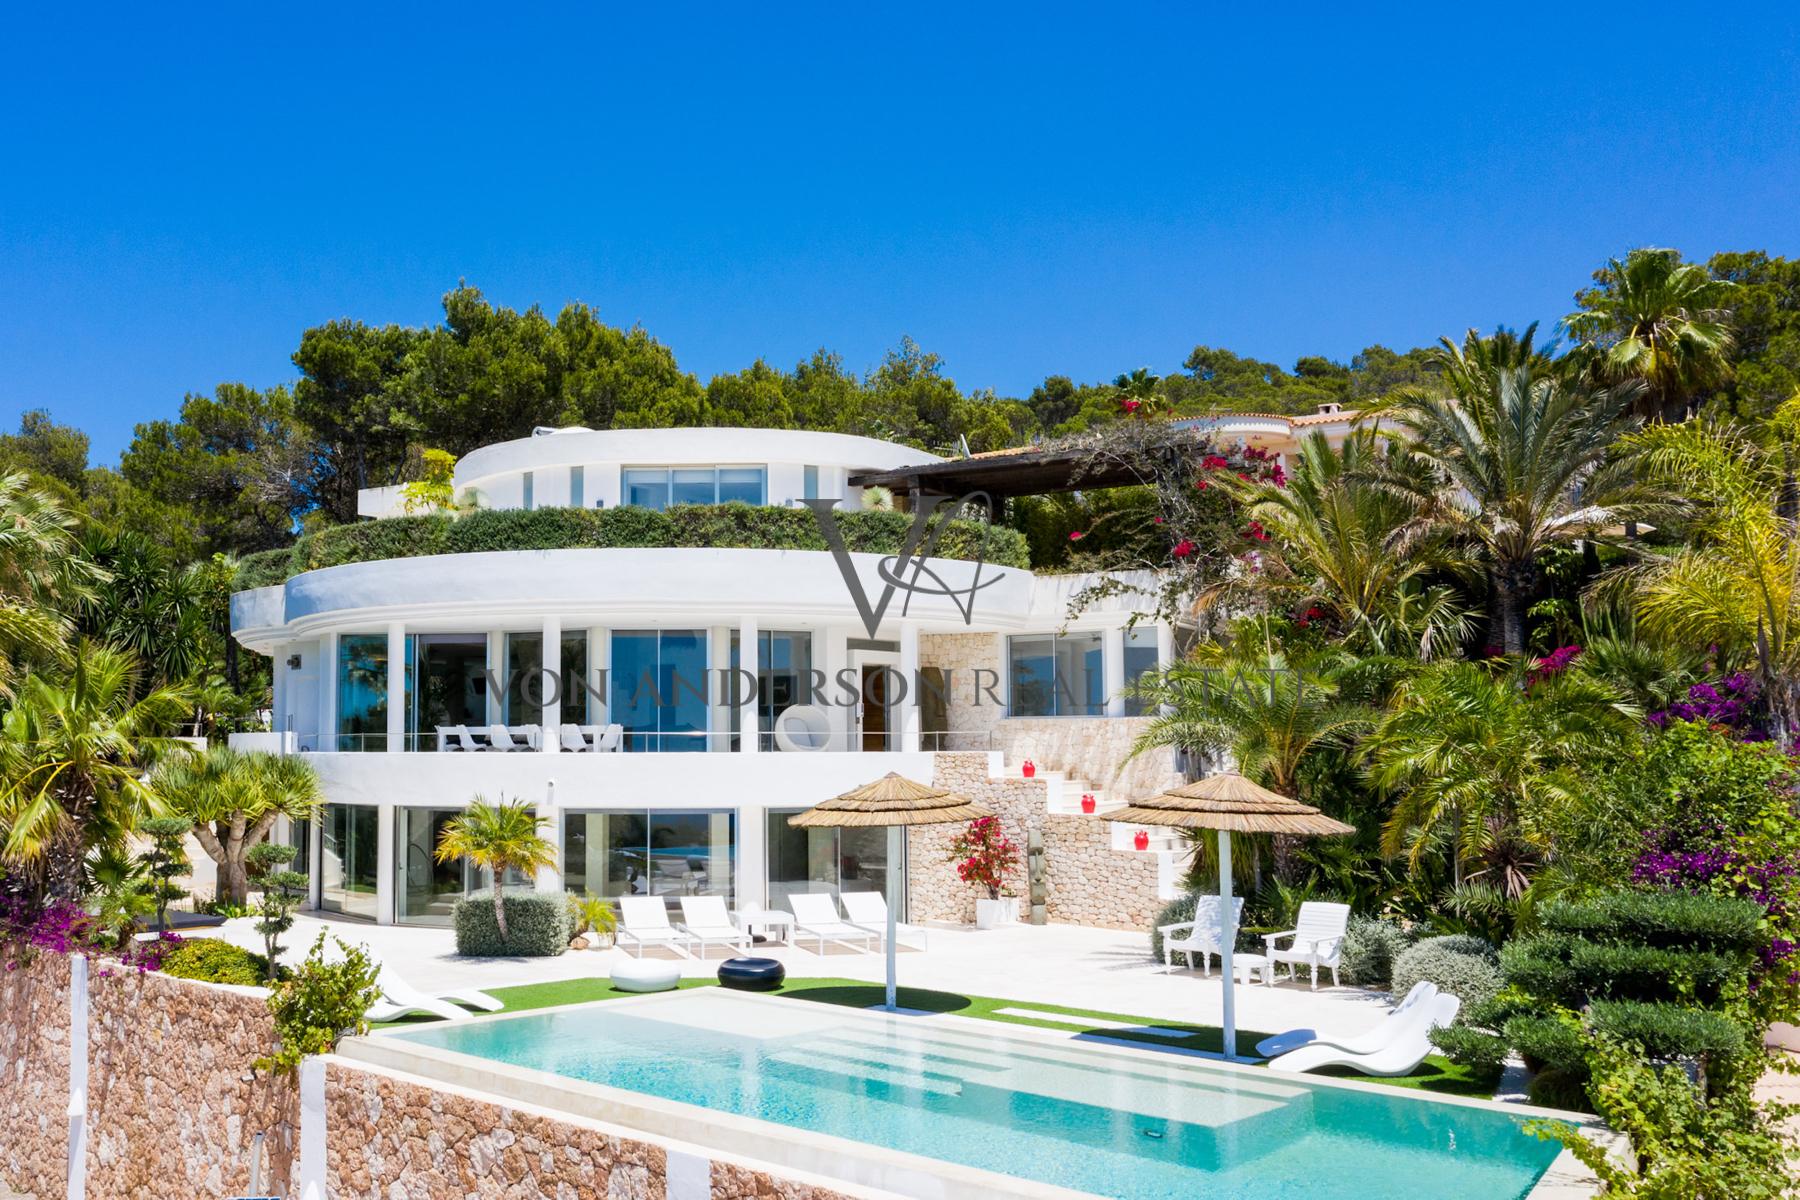 Exquisite Urban Residence with Breathtaking Views of the Sea and Mesmerising Sunsets, ref. VA1033, for sale in Ibiza by Von Anderson Real Estate